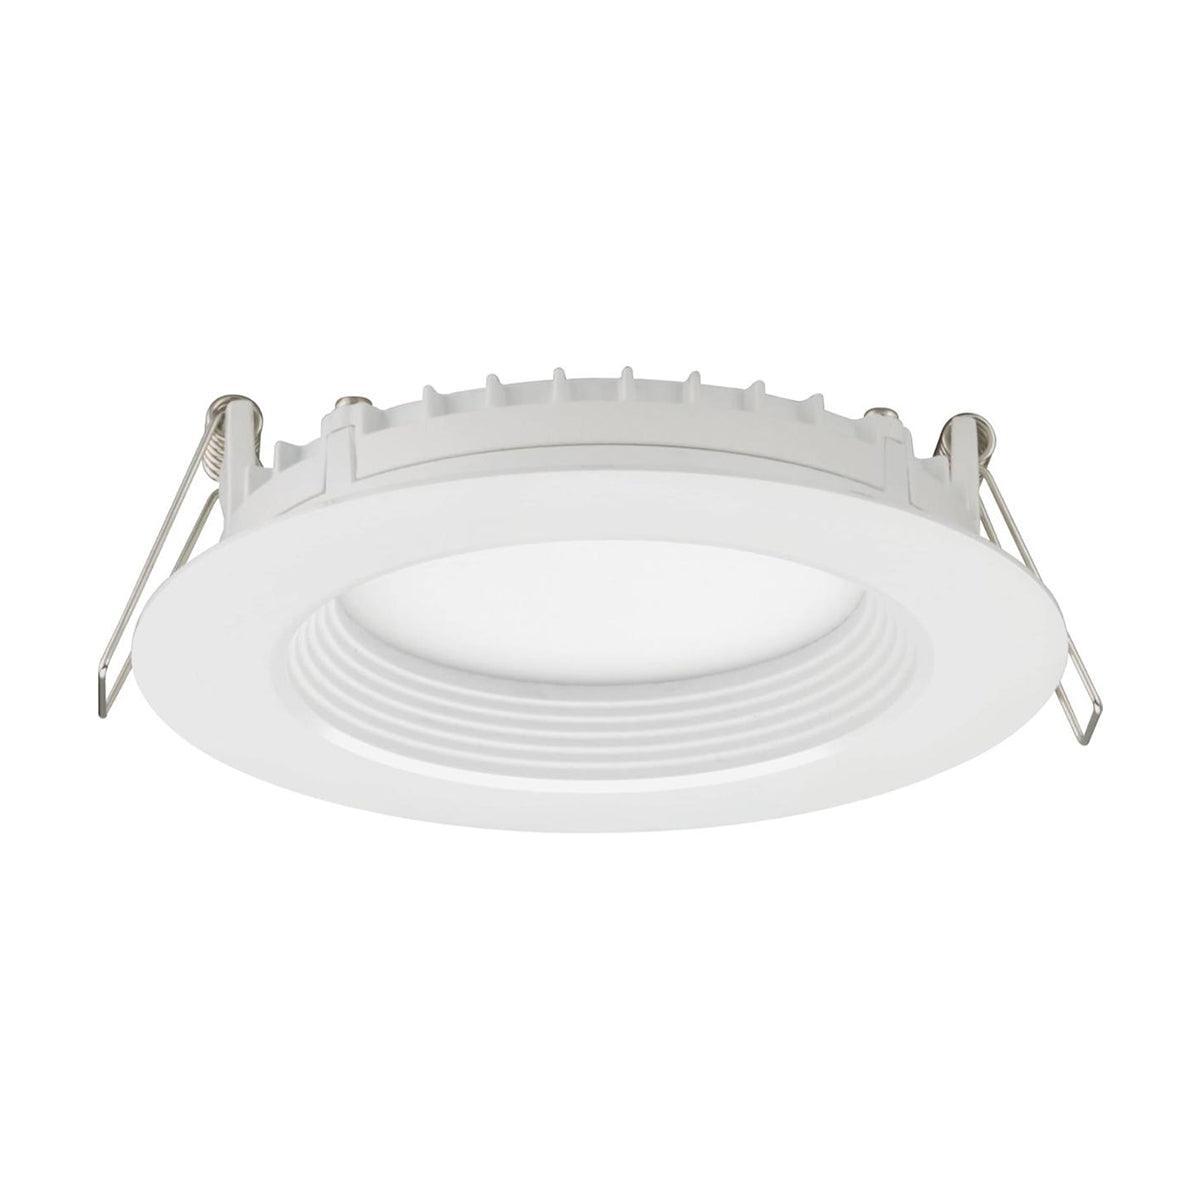 4 In. Wafer Regress LED Recessed Light, 700 Lumens, Selectable CCT, 2700K to 5000K, White Finish